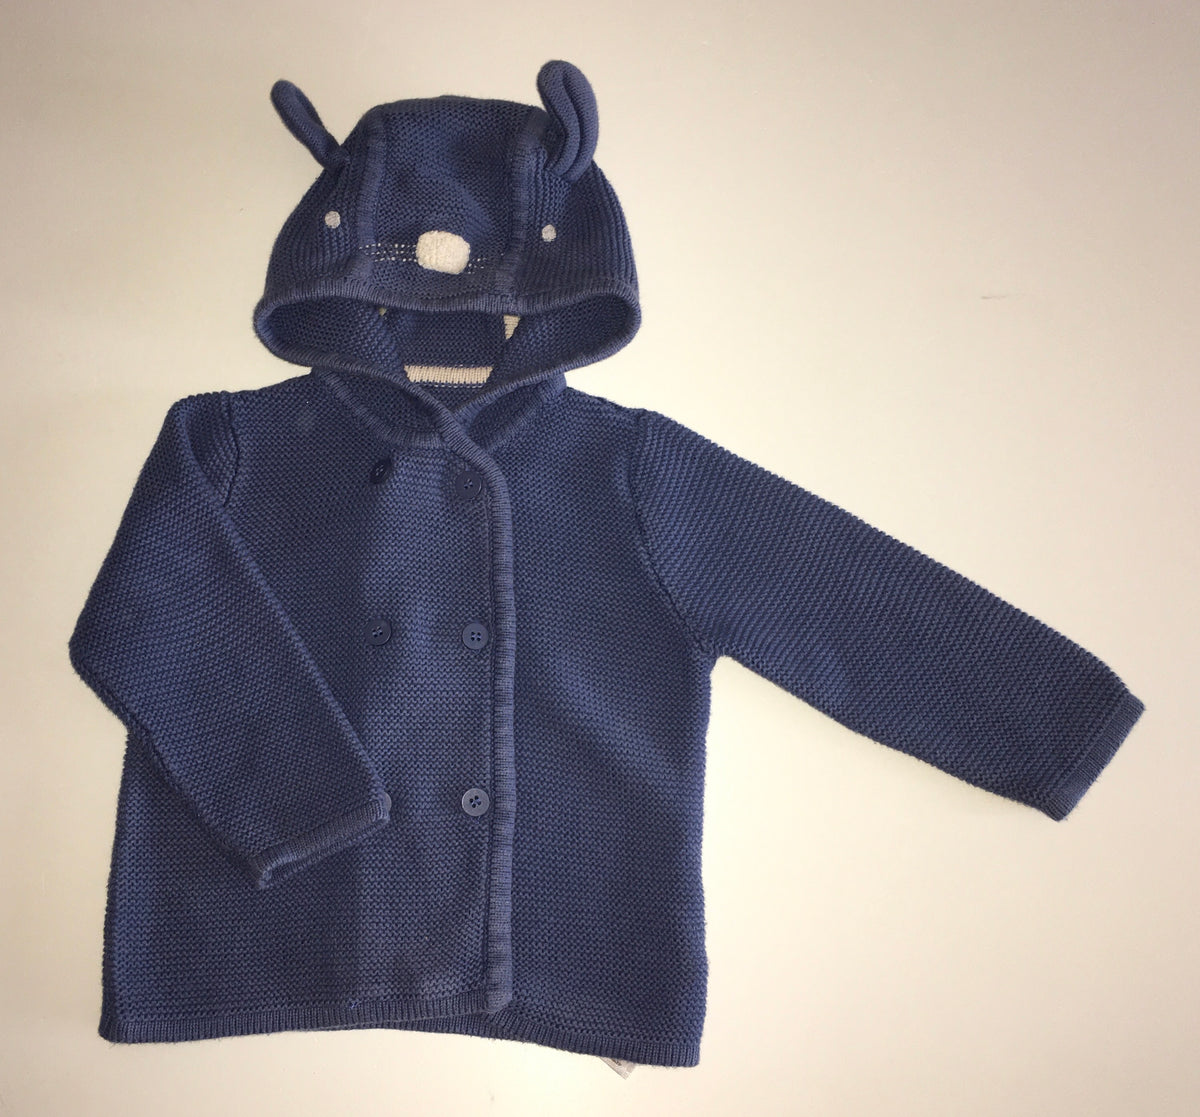 Mothercare Knit Jacket, Boys 3-6 Months